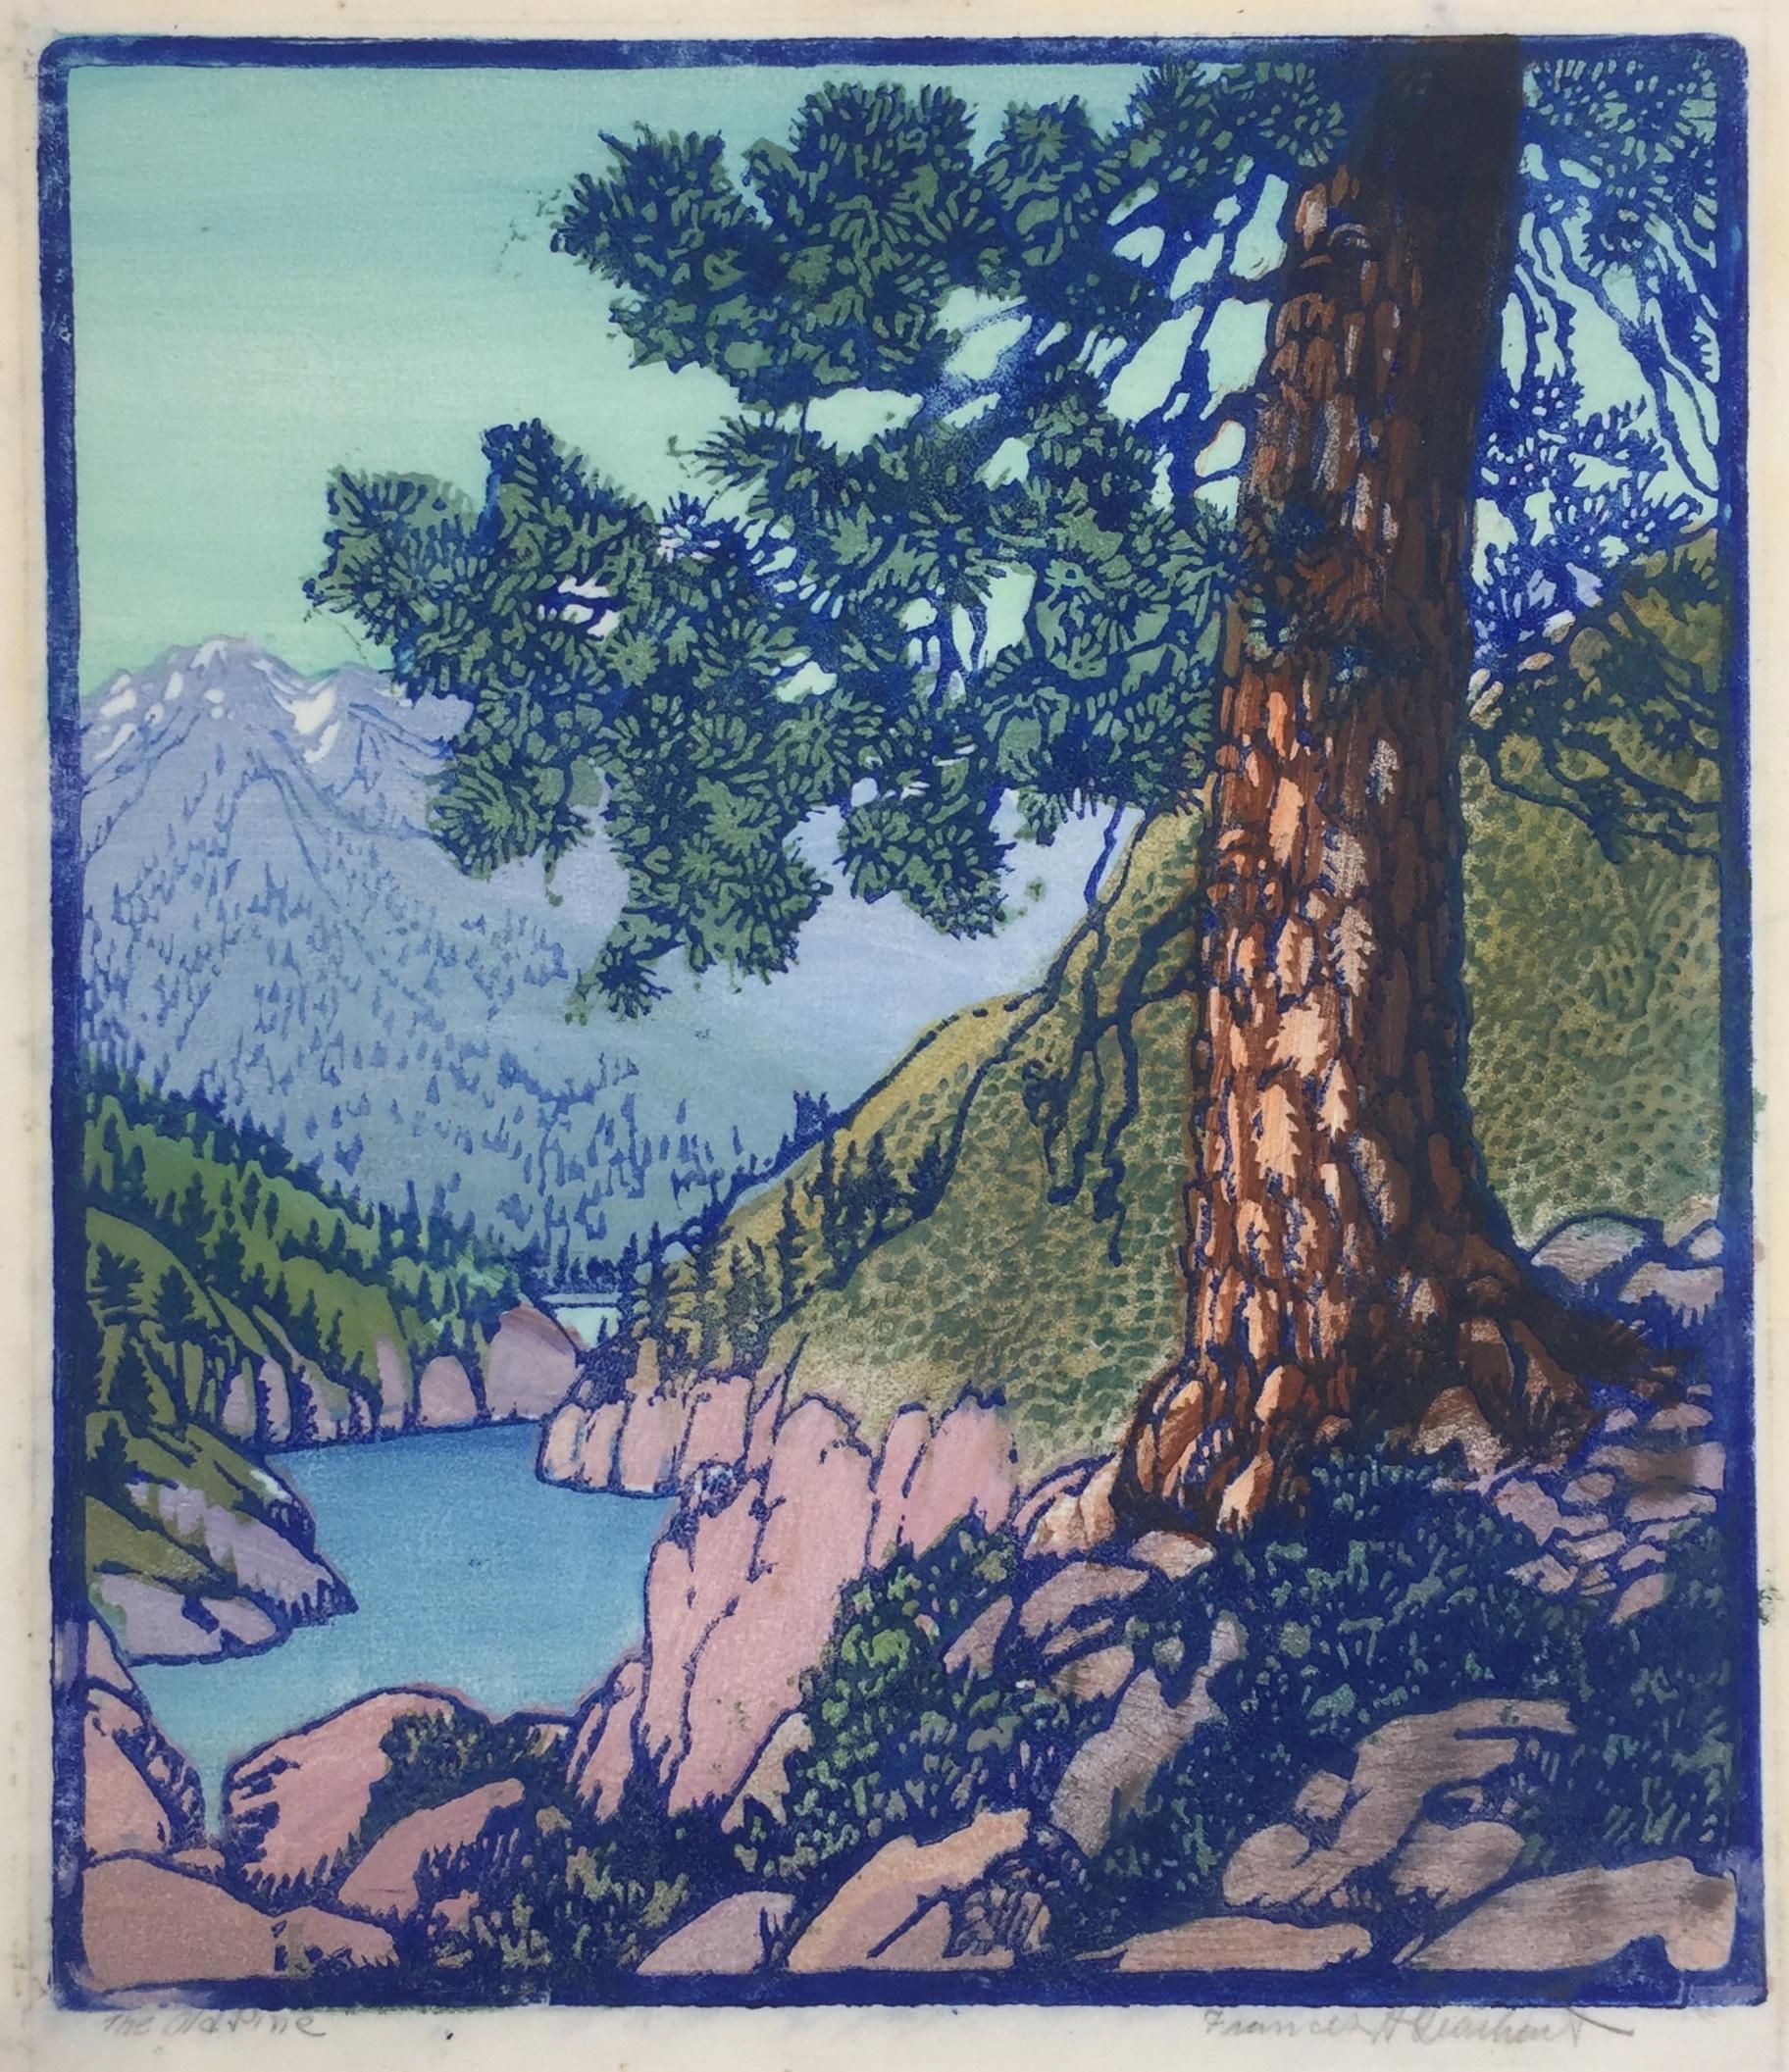 THE OLD PINE - Very Good Large Scale Work by a Master of the Color Block Print